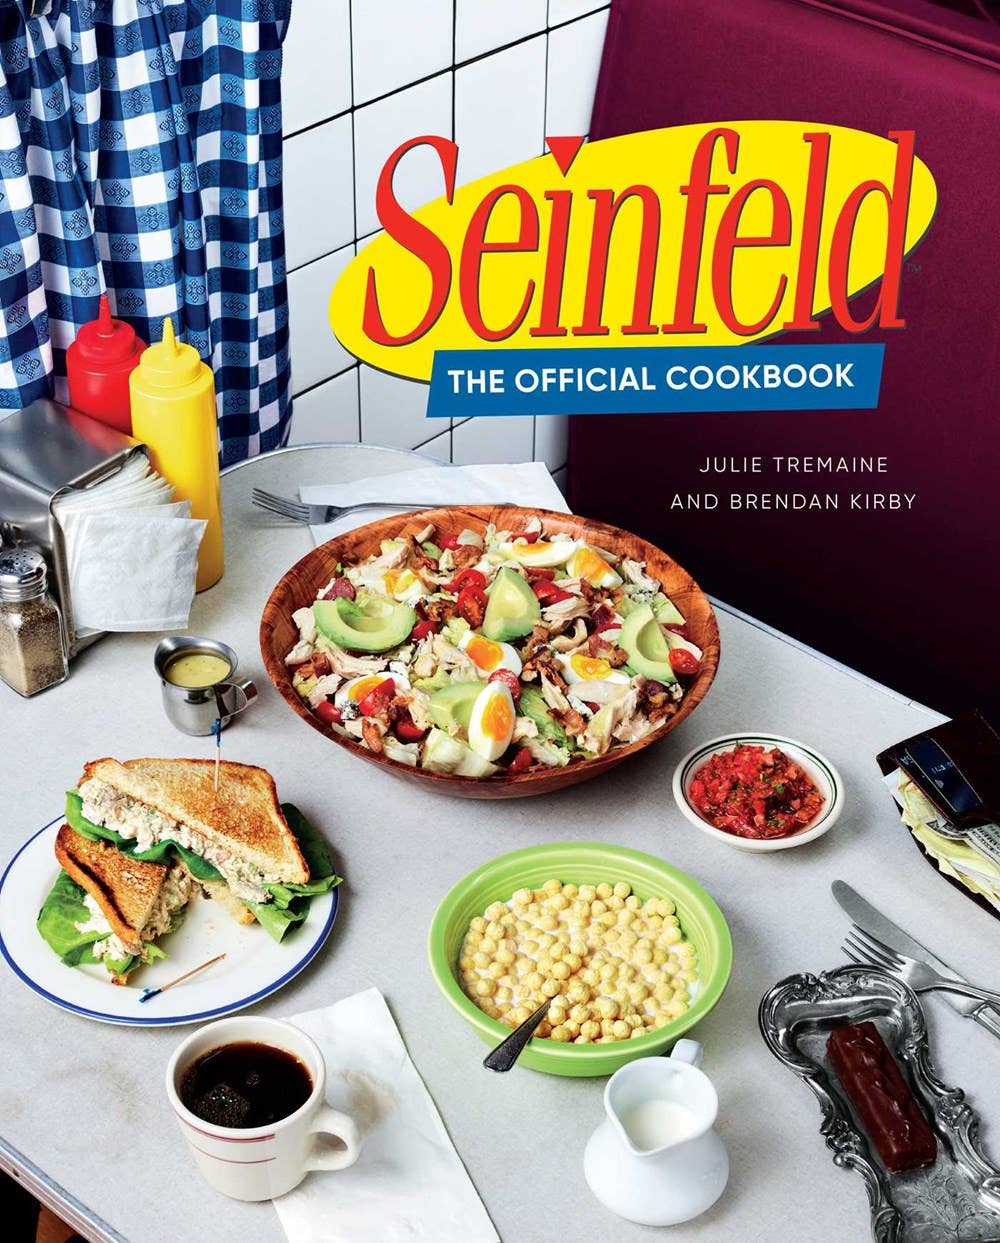 Seinfeld: The Official Cookbook (60 Memorable Recipes)